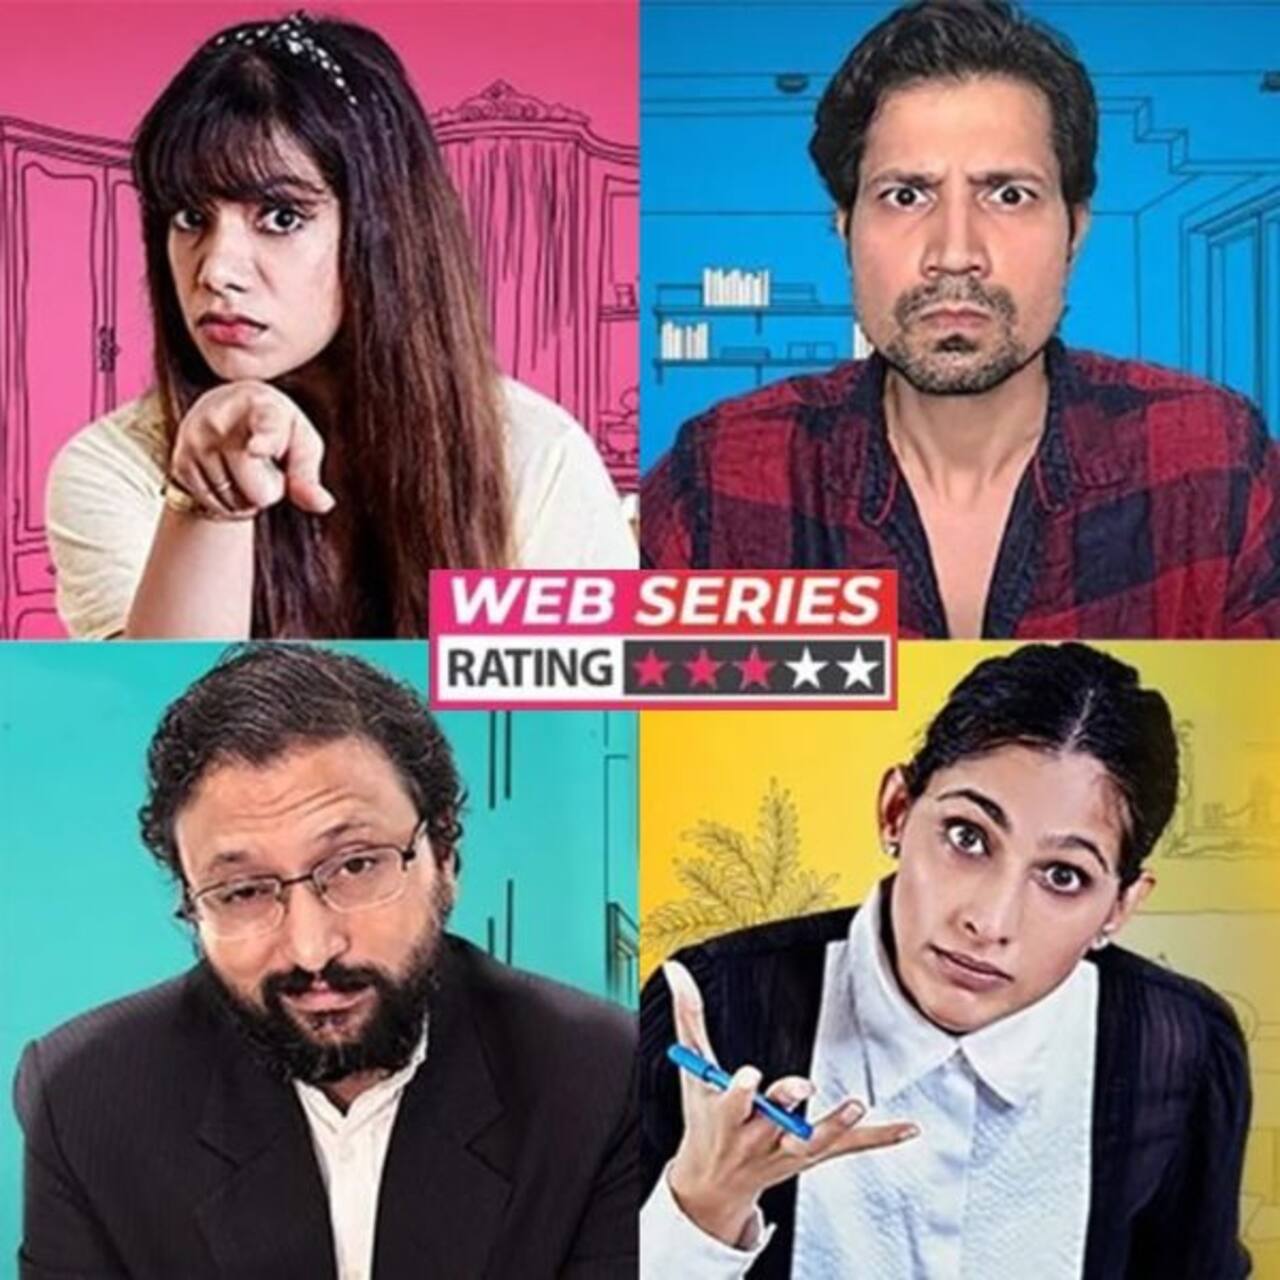 Wakaalat from Home web series review: Sumeet Vyas, Nidhi Singh and Kubbra Sait's chemistry makes this a fun detox on divorce